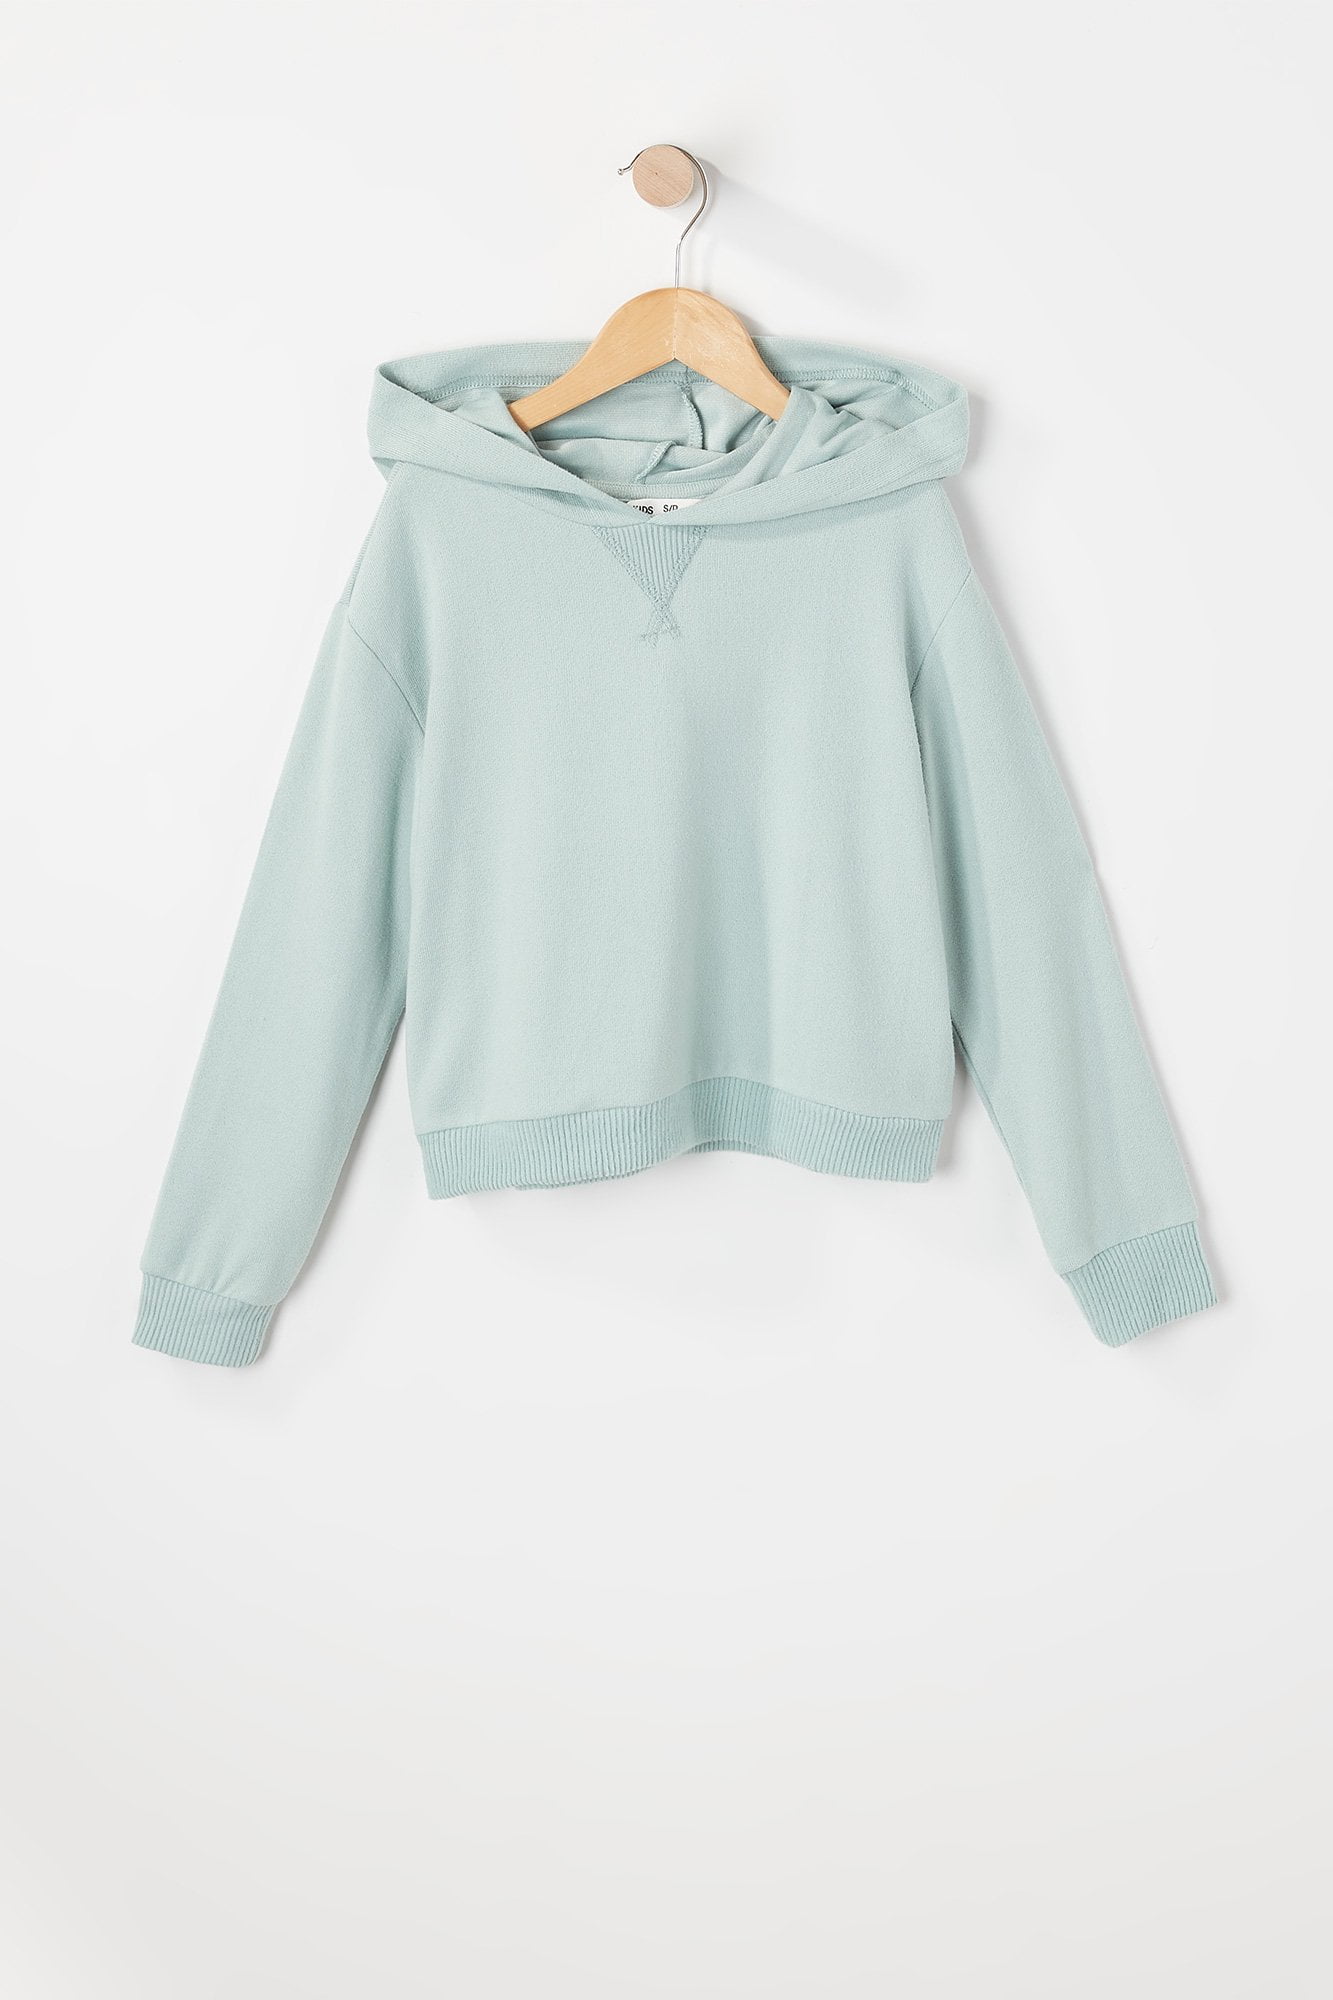 Urban Kids Youth Girls Relaxed Long Sleeve Hooded Top | Walmart Canada